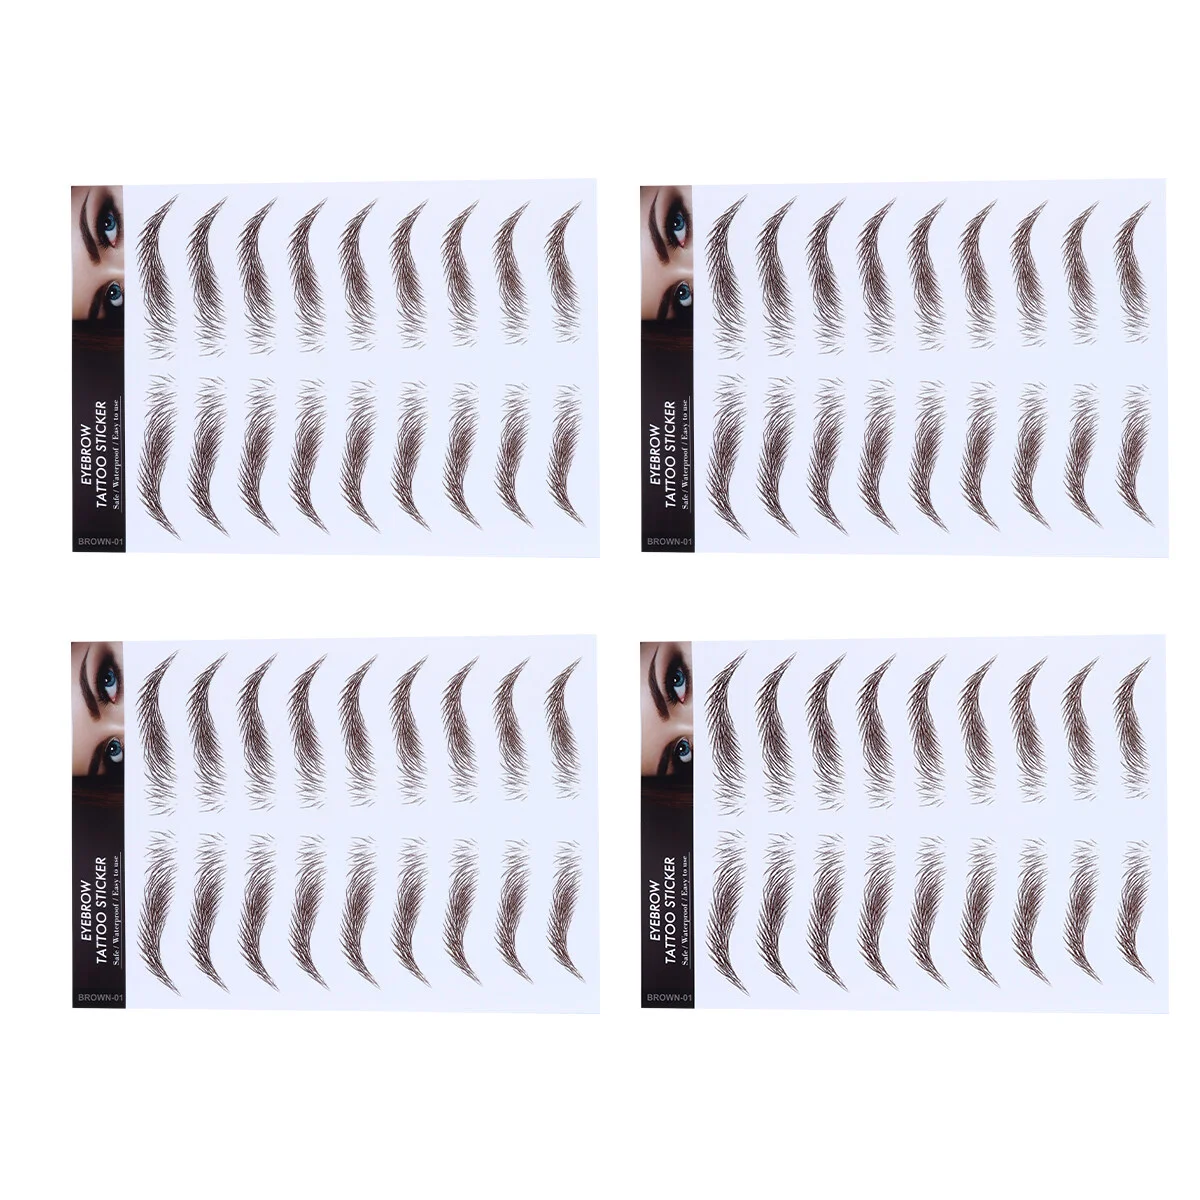 

4 Pcs Eyebrow Stickers 6D Hair-Like Eyebrows Make Kit Artificial Water Transfer Paper Soy Ink